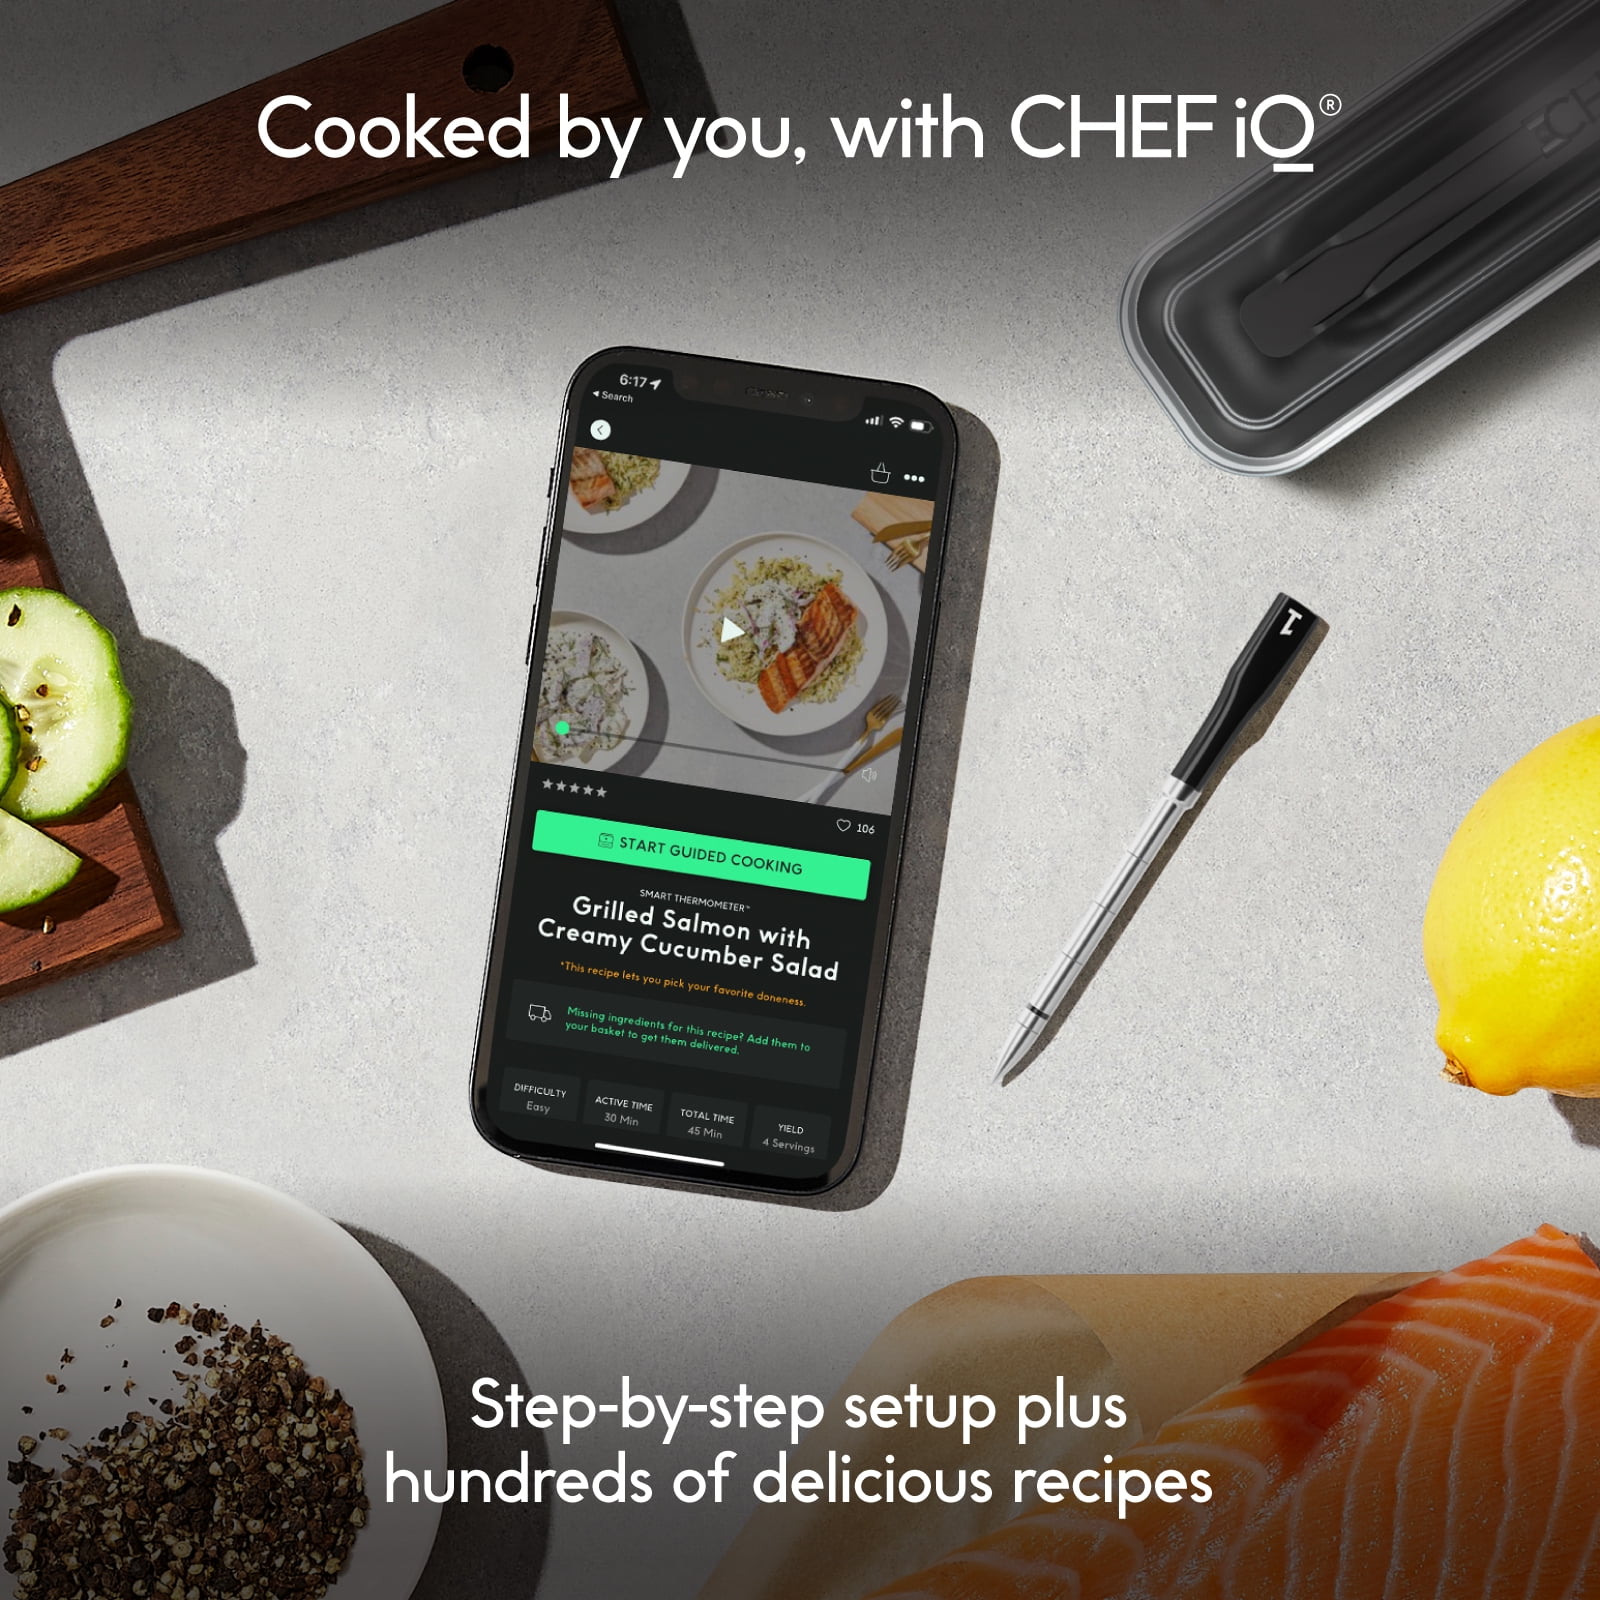  Chef iQ Smart Thermometer Add-on No. 3, Bluetooth/WiFi Enabled,  Allows Monitoring of Two Foods at Once, for Grill, Oven, Smoker, Air Fryer,  Stove, Must Be Used with Hub (Sold Separately): Home